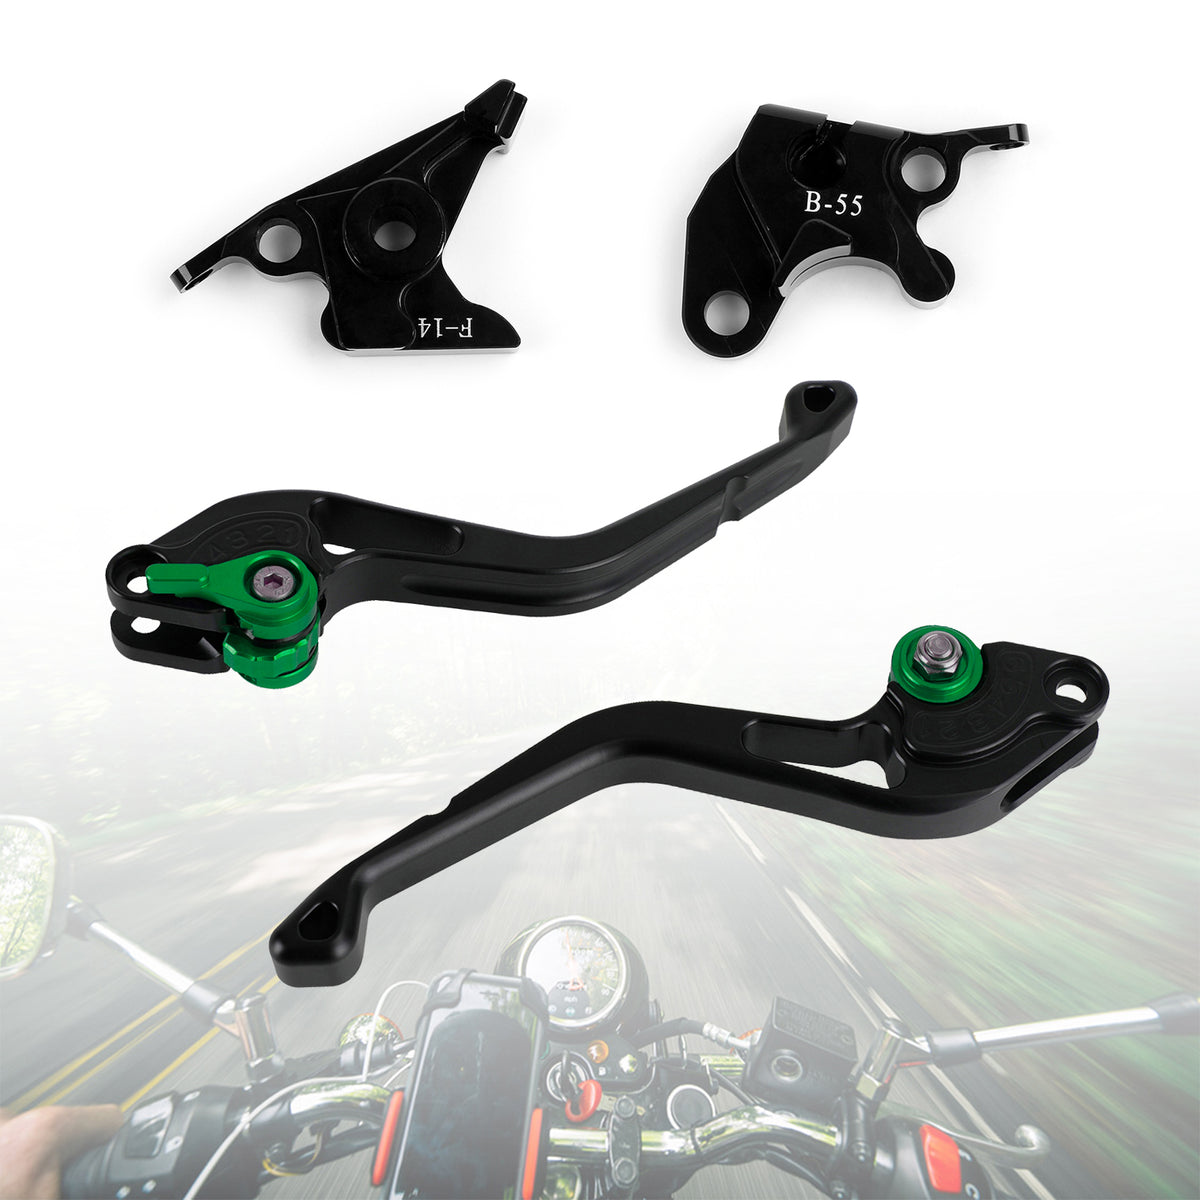 NEW Short Clutch Brake Lever fit for Buell XB12R XB12Ss XB12Scg M2 Cyclone